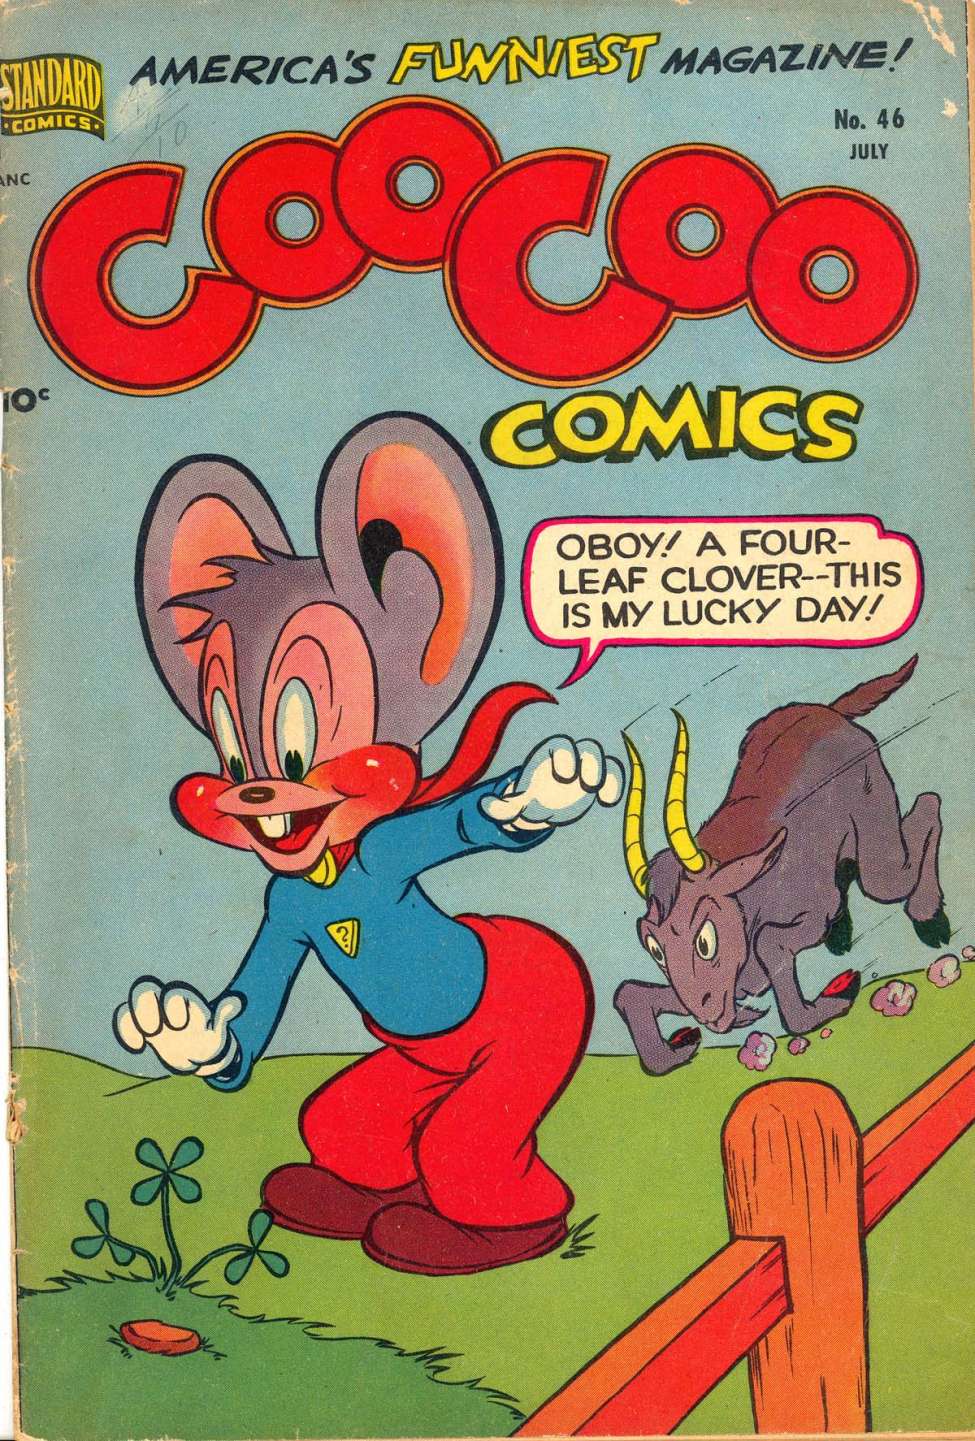 Book Cover For Coo Coo Comics 46